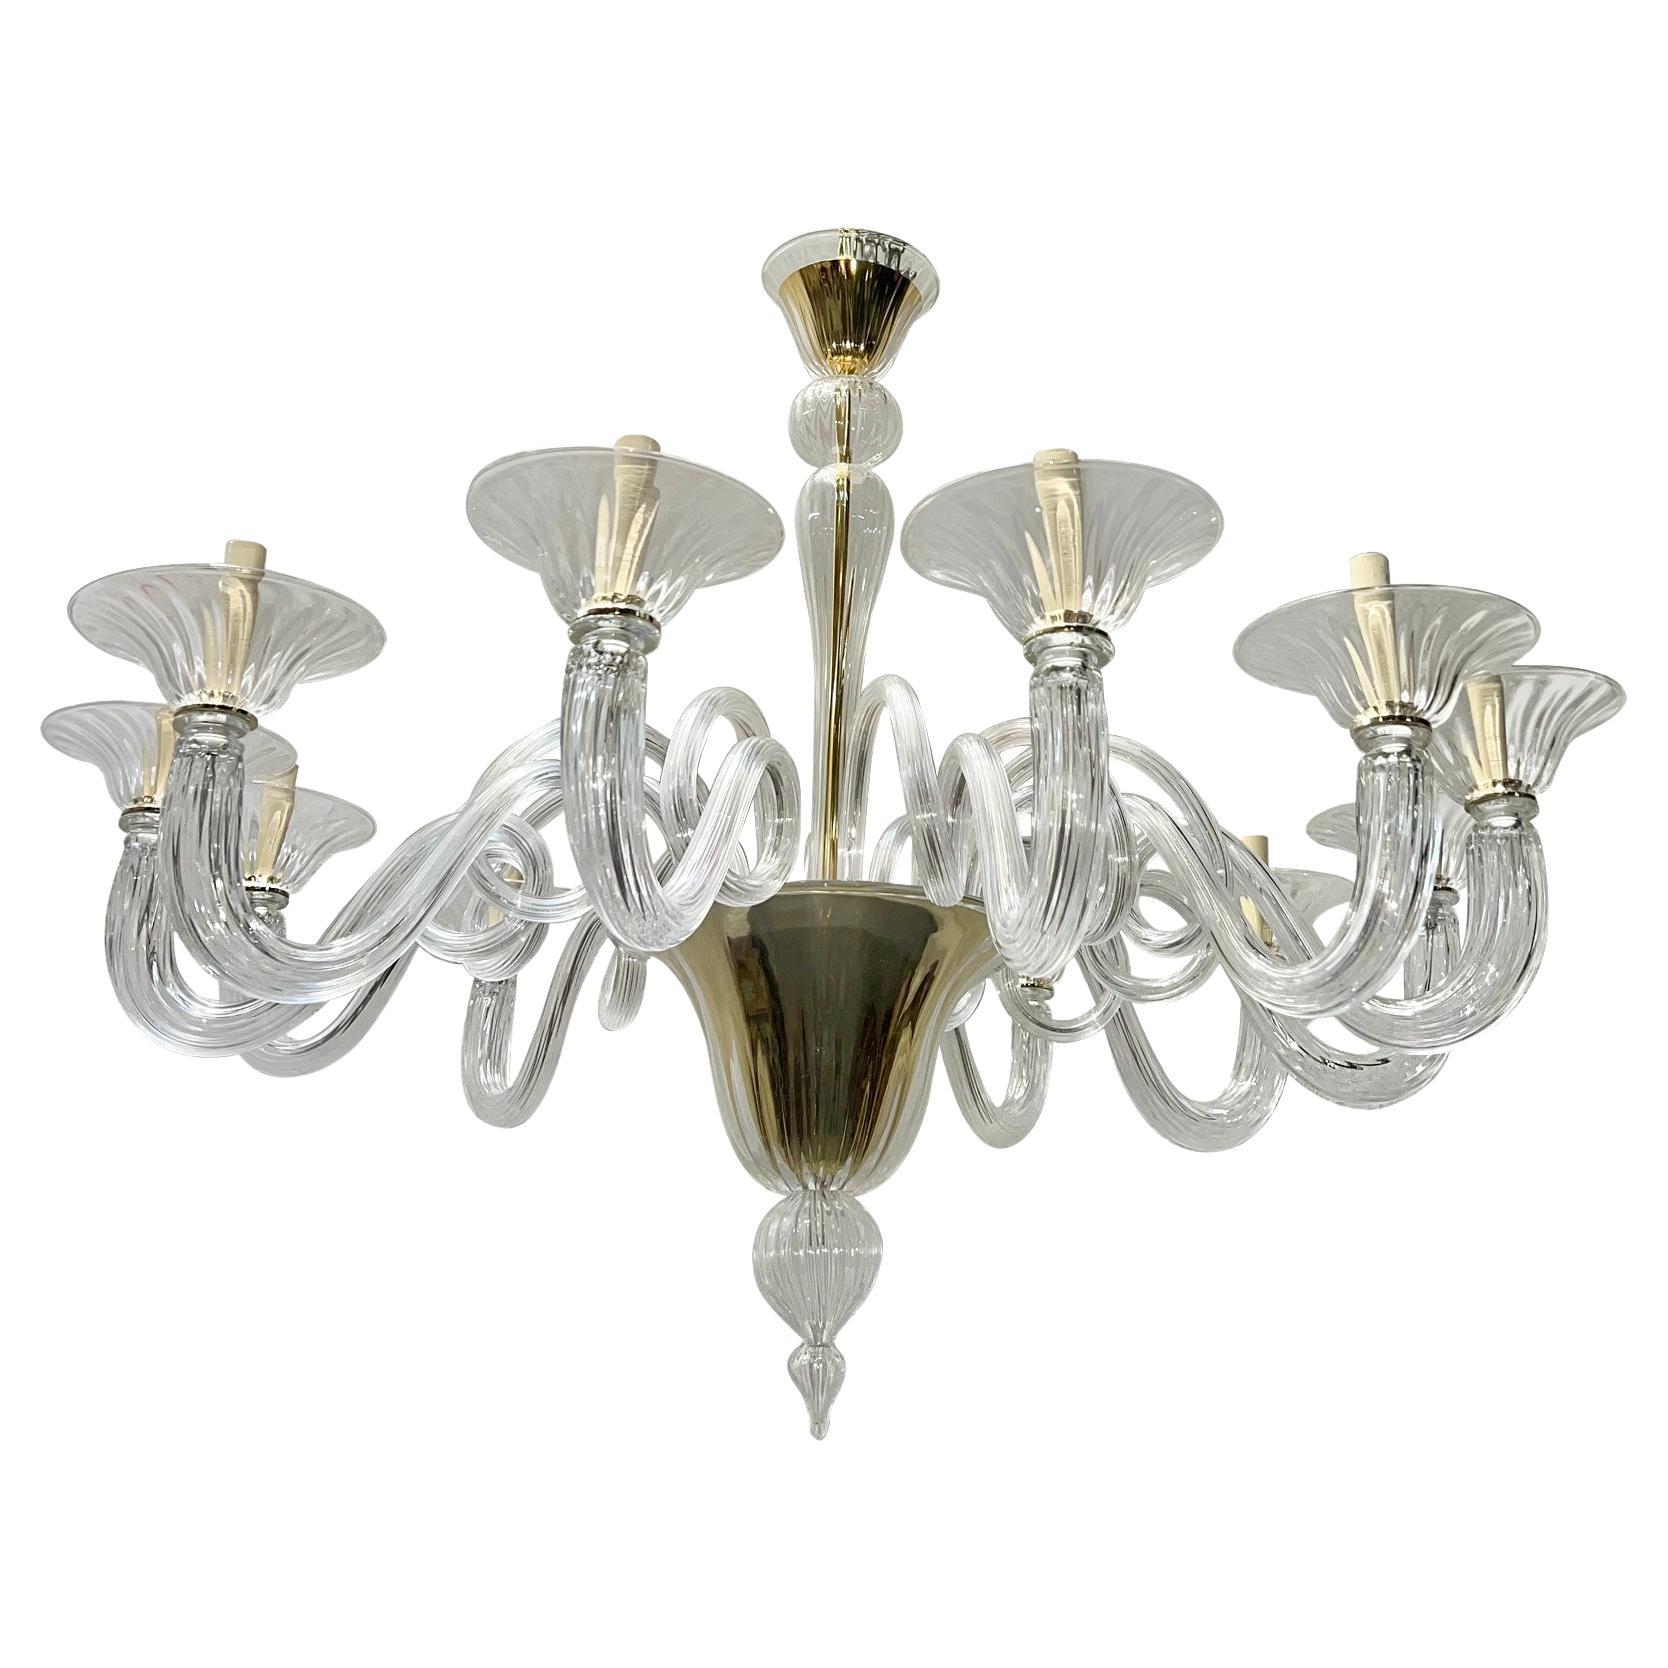 Pair of Large Midcentury Murano Glass Chandeliers, Sold Individually